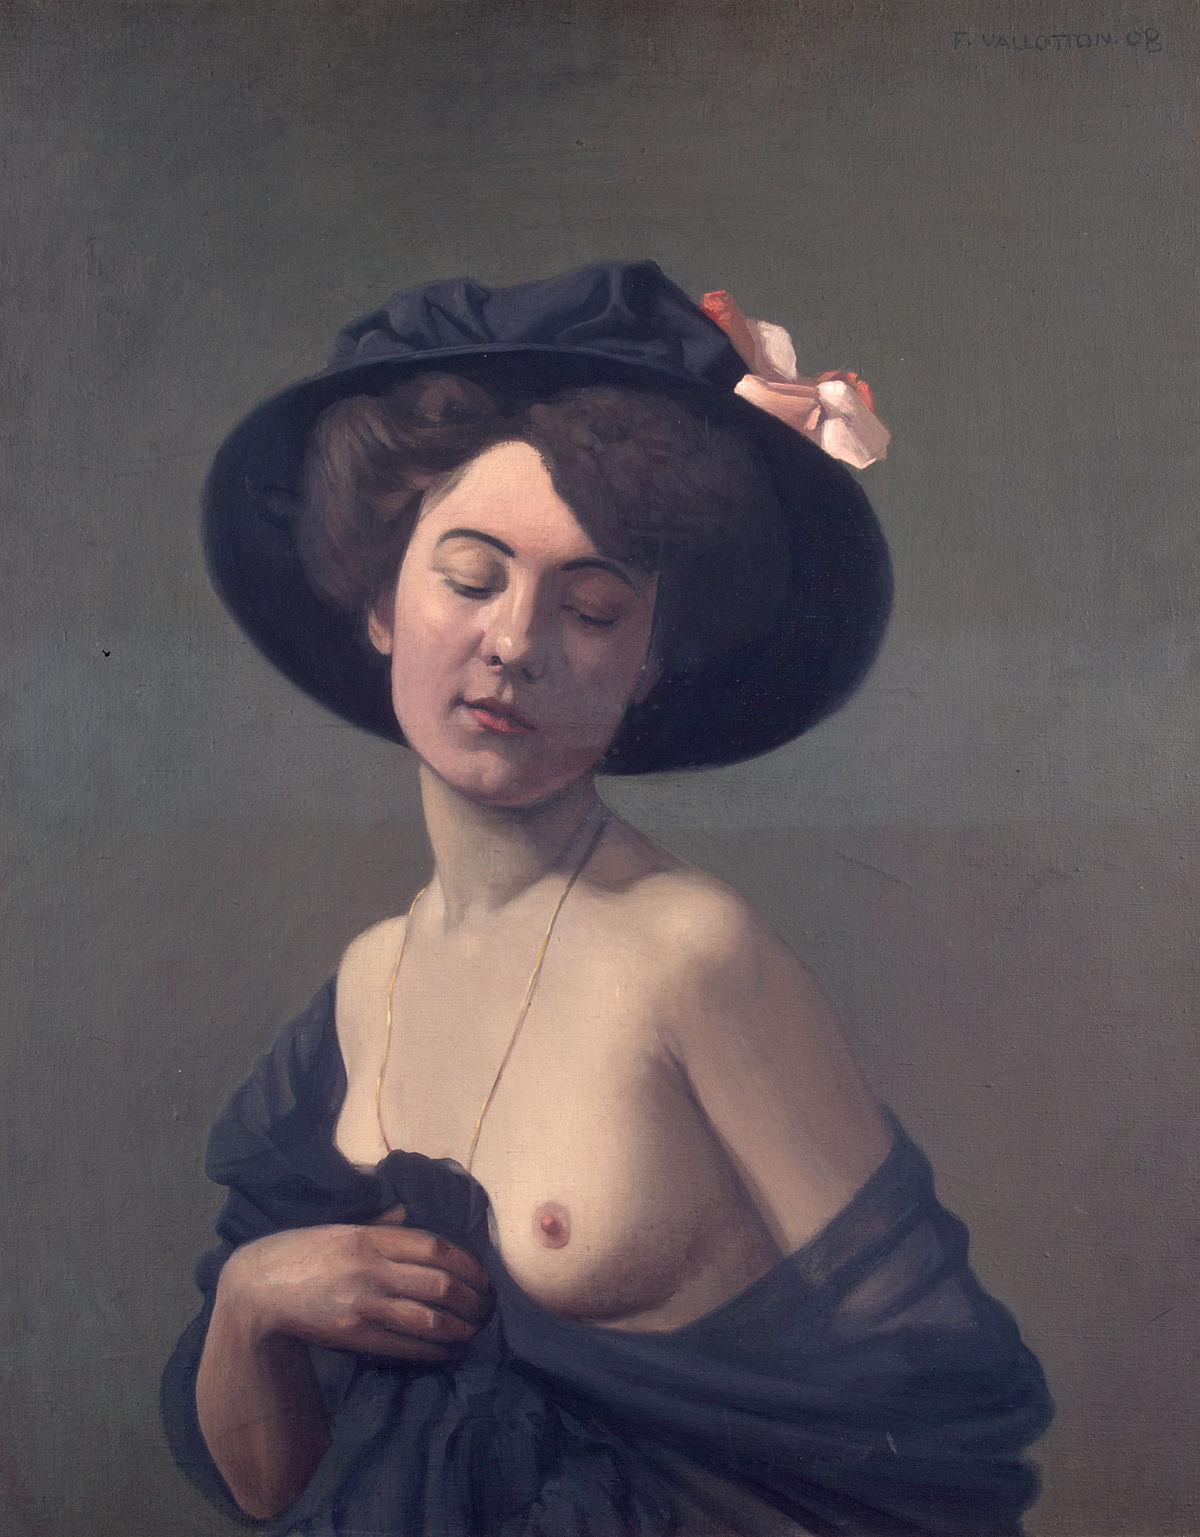 http://upload.wikimedia.org/wikipedia/commons/thumb/7/7a/Felix_Vallotton_Woman_with_a_Black_Hat.jpg/1200px-Felix_Vallotton_Woman_with_a_Black_Hat.jpg